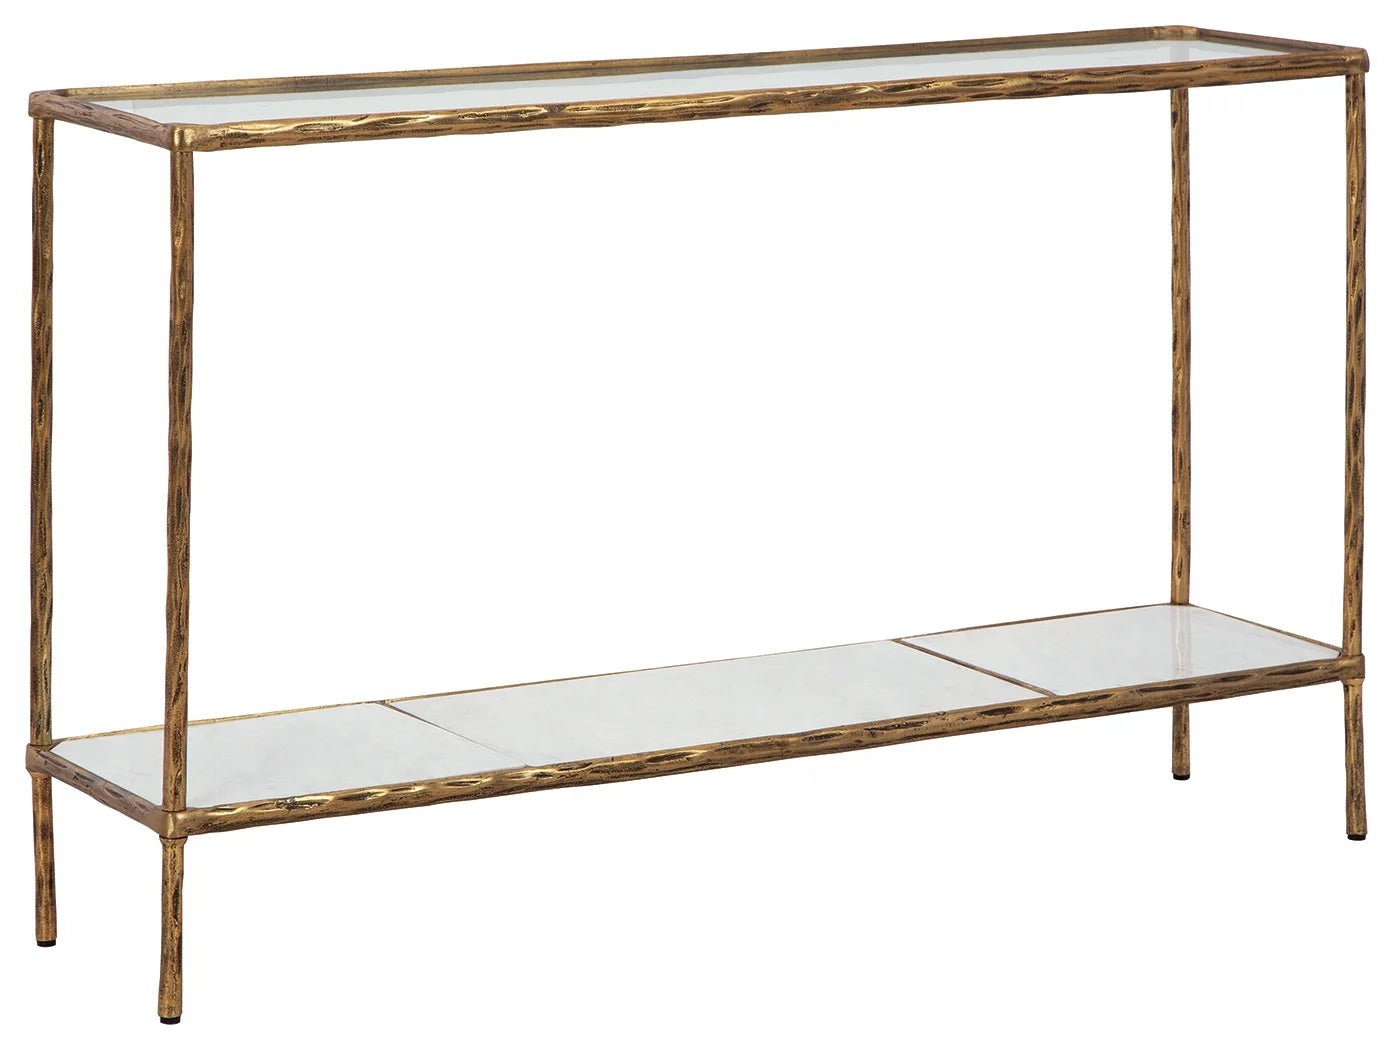 Ryandale - Antique Brass Finish - Console Sofa Table 1